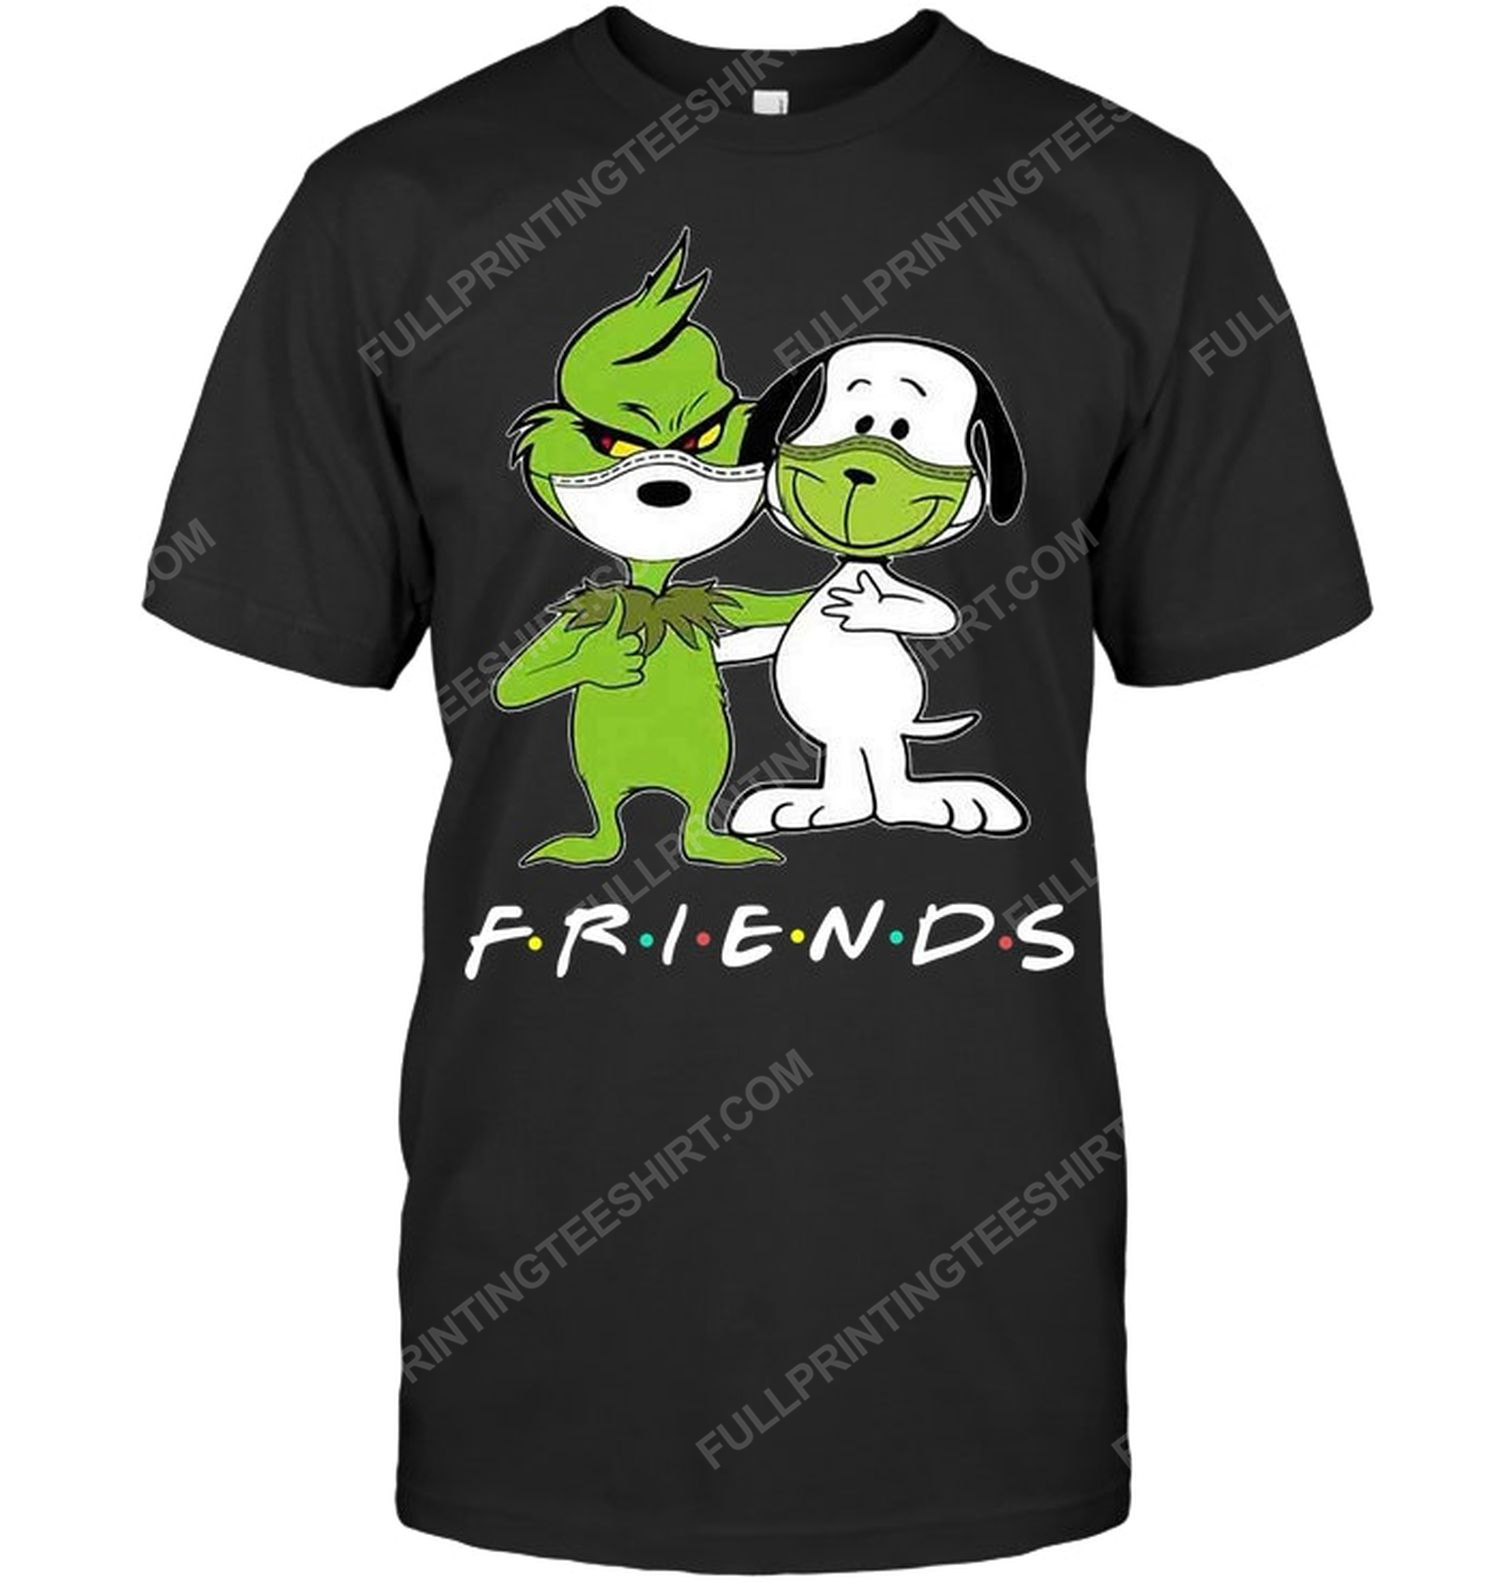 The grinch and snoopy friends tv show tshirt